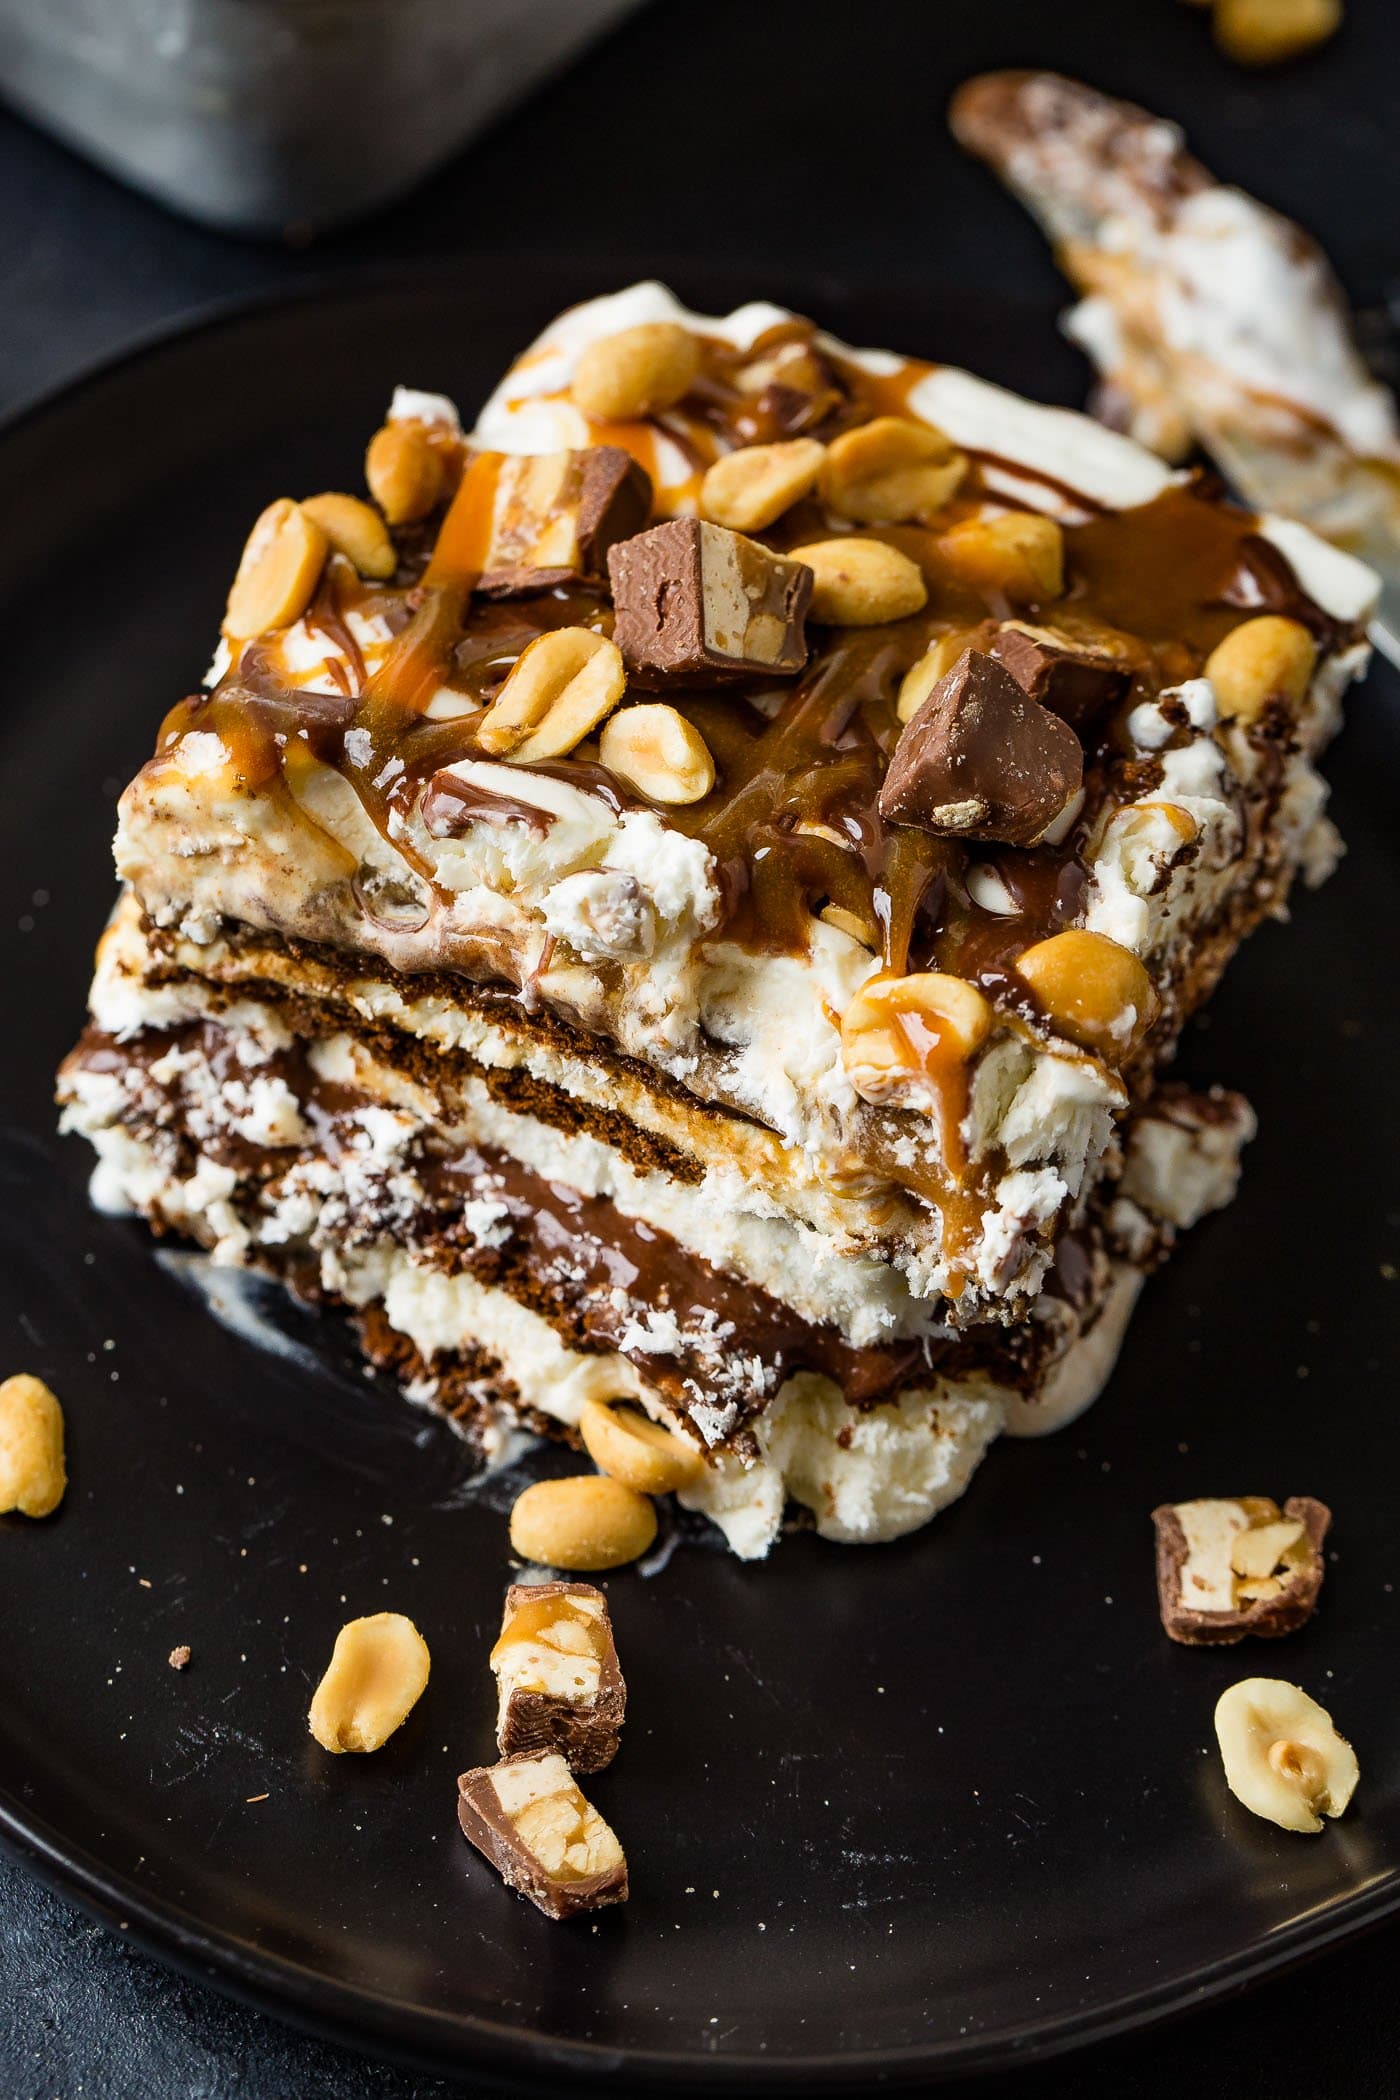 A piece of snickers ice cream cake on a dessert plate. The cake has layers of chocolate cake, ice cream, whipped cream, hot fudge, and caramel sauce. The top is covered with whipped cream, drizzles of hot fudge and caramel sauce, and salted peanuts. Chunks of snickers bars and peanuts are scattered around it.